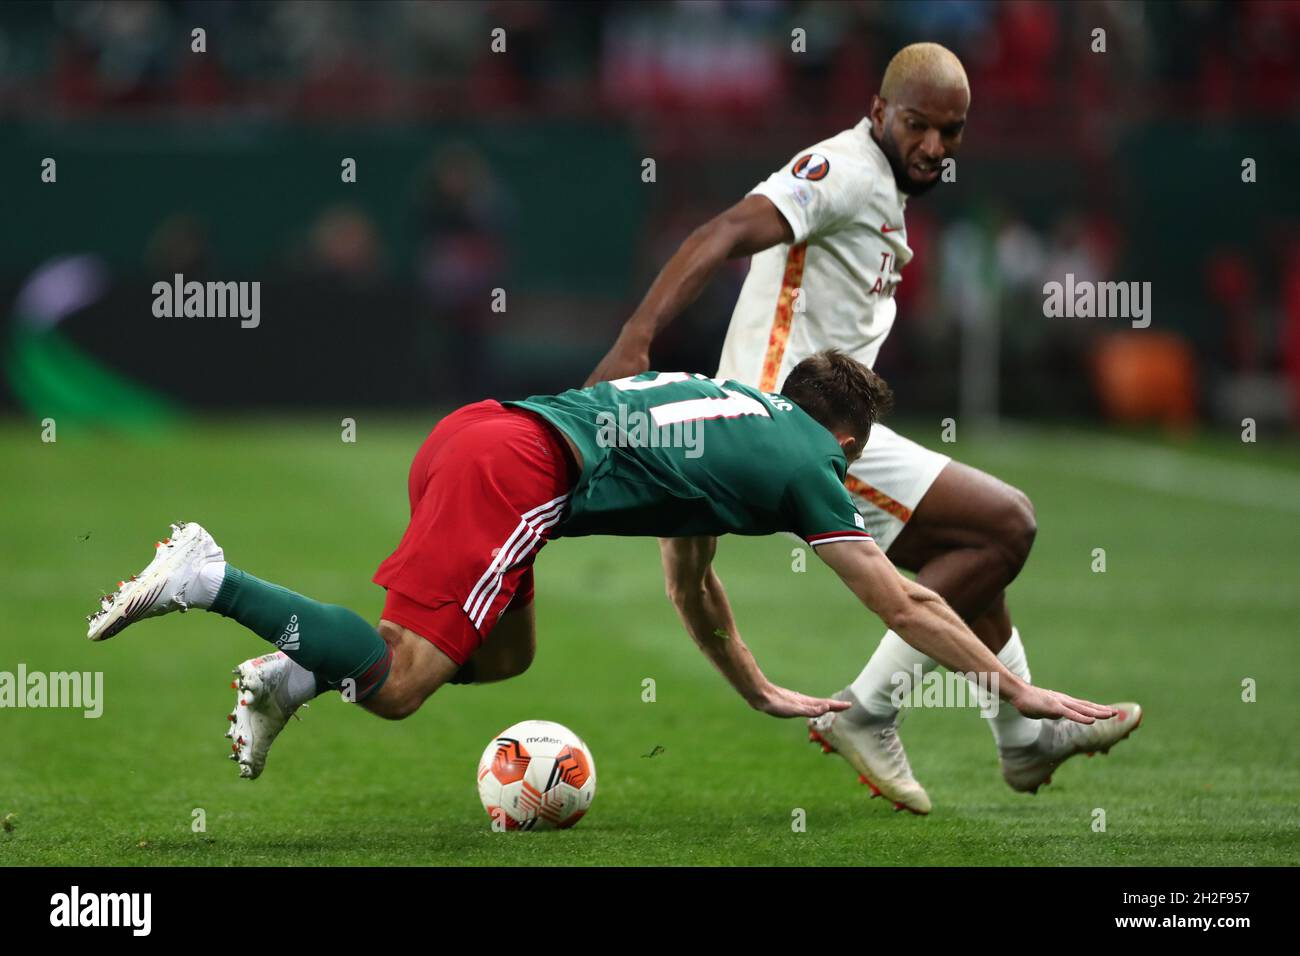 Moscow. MOSCOW,  - OCTOBER 21: defender Maciej Rybus of FC Lokomotiv and forward Ryan Babel of FC Galatasaray during UEFA Europa League Group stage match FC Lokomotiv v FC Galatasaray at Lokomotiv Stadium in Moscow. MOSCOW,  - OCTOBER 21: (Photo by Anatoliy Medved) Stock Photo